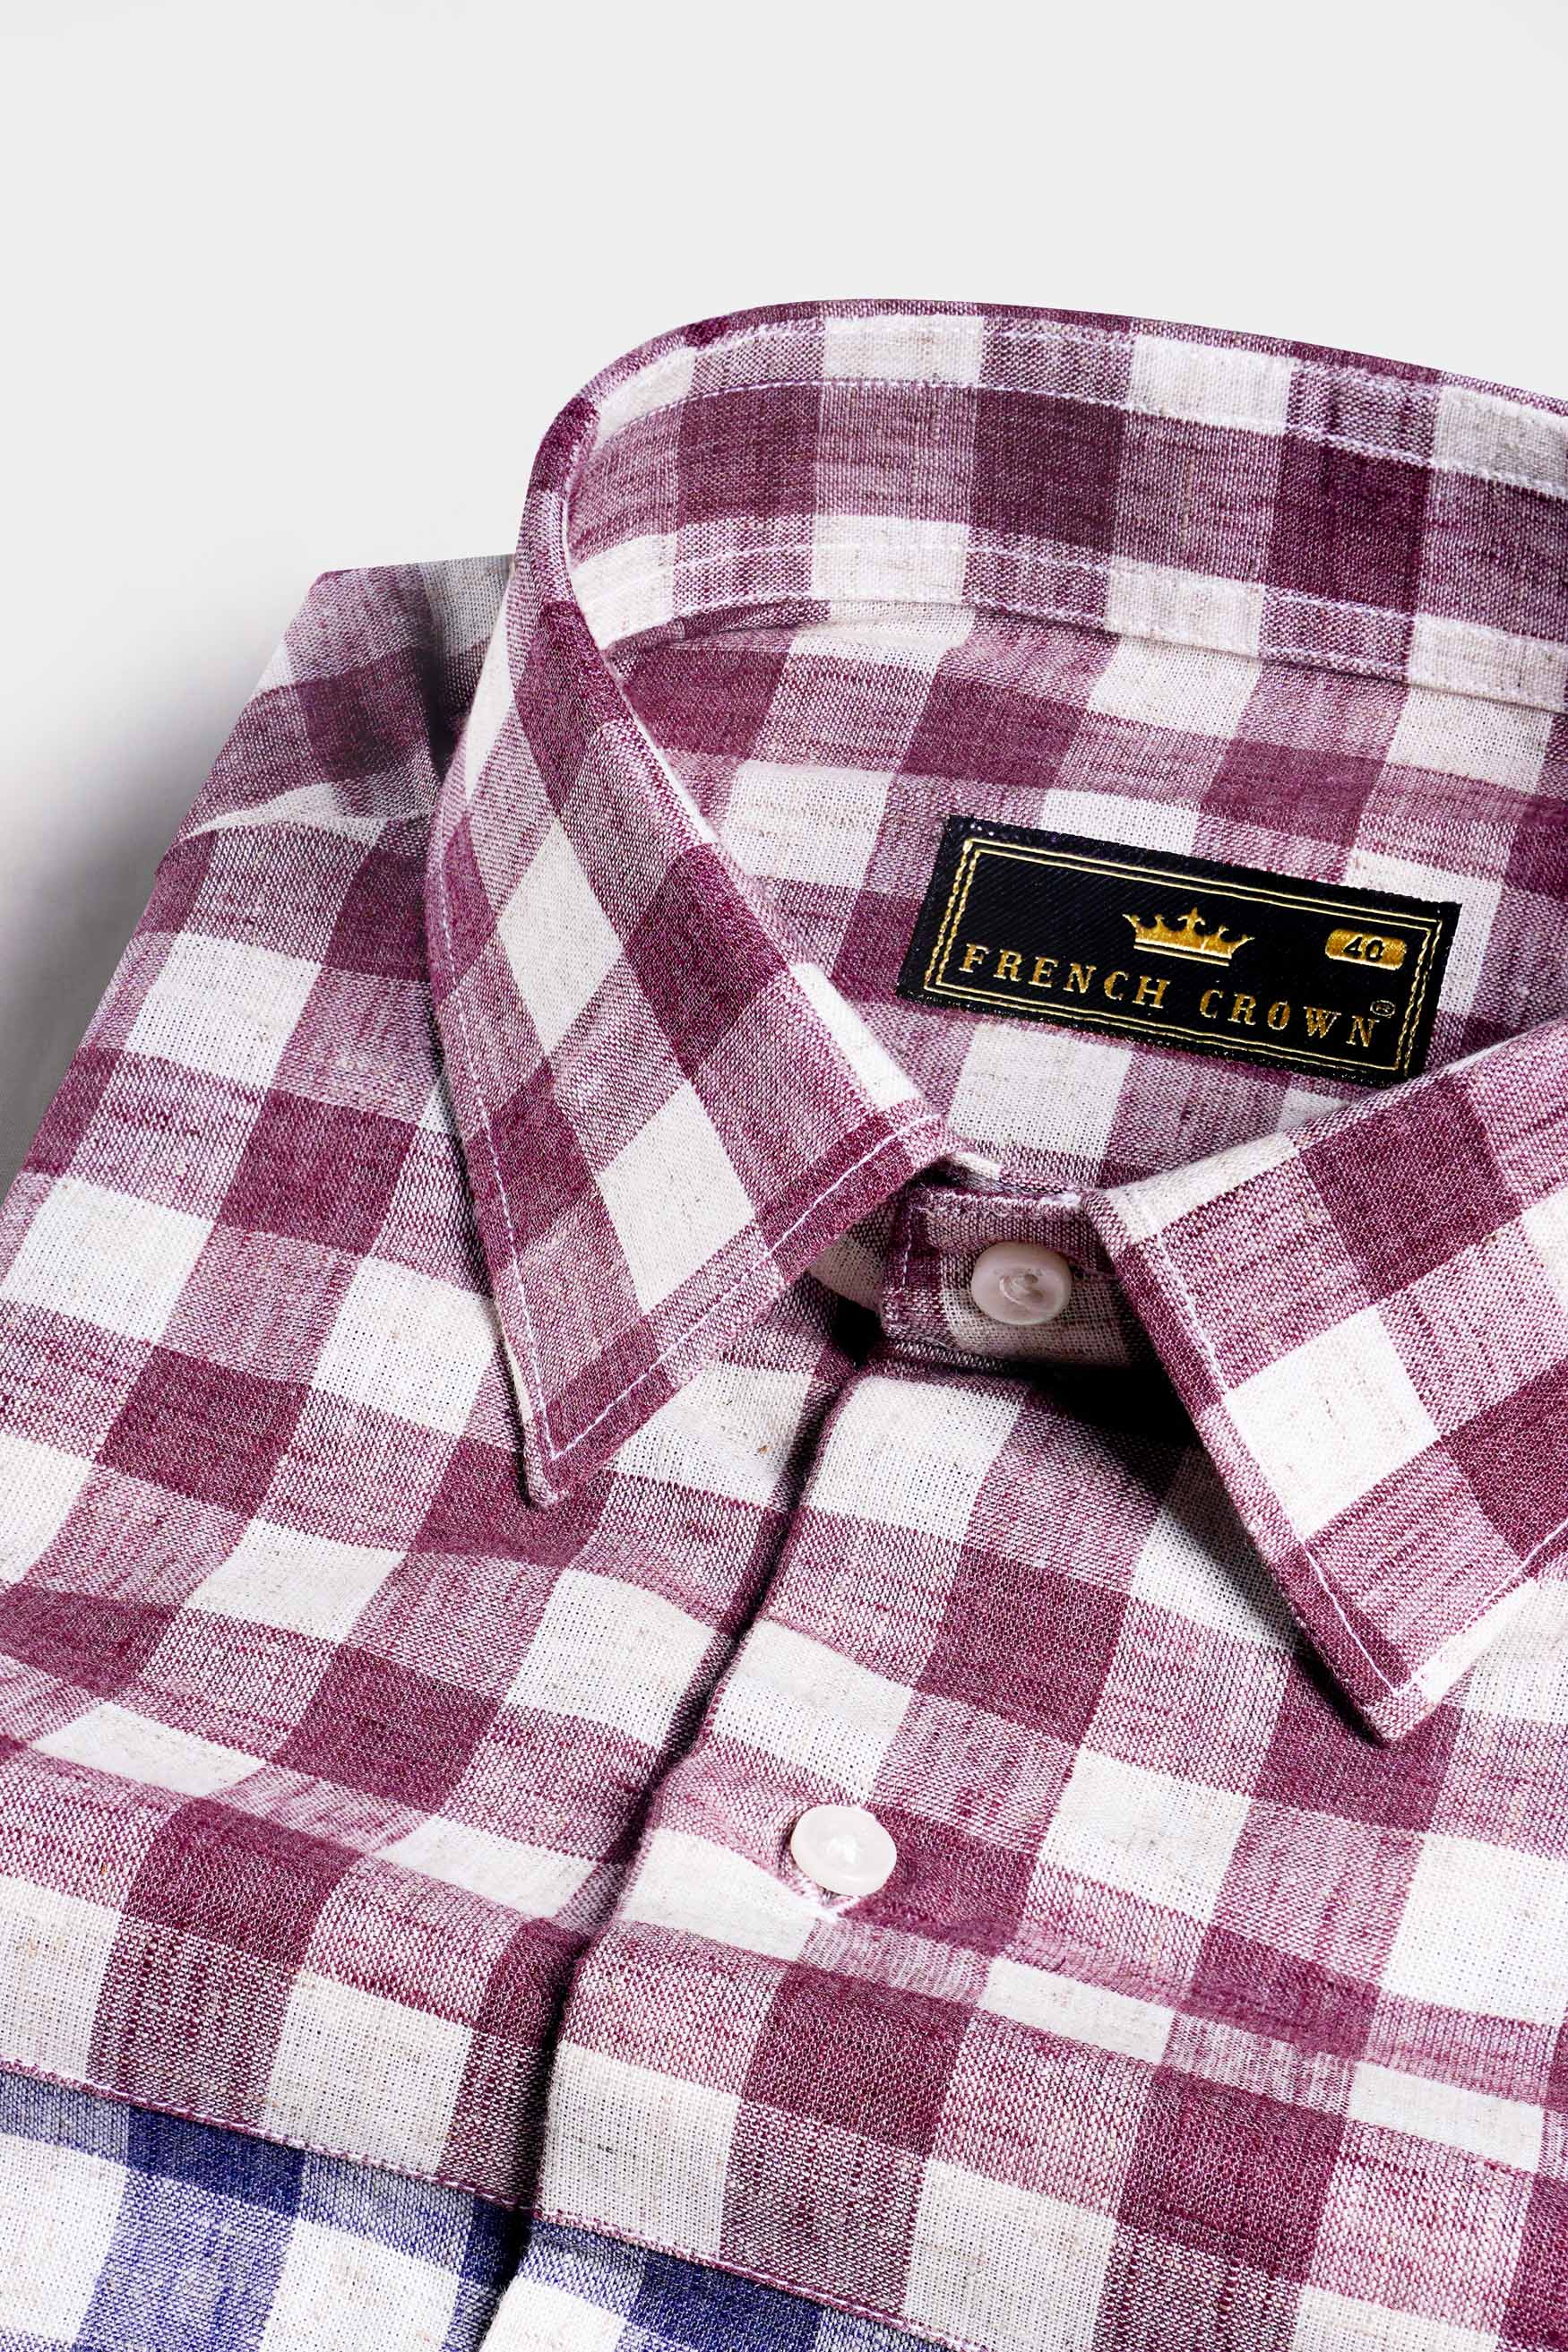 Rhino Blue with Muave Pink and White Plaid Luxurious linen Designer Shirt 11617-P575-38, 11617-P575-H-38, 11617-P575-39, 11617-P575-H-39, 11617-P575-40, 11617-P575-H-40, 11617-P575-42, 11617-P575-H-42, 11617-P575-44, 11617-P575-H-44, 11617-P575-46, 11617-P575-H-46, 11617-P575-48, 11617-P575-H-48, 11617-P575-50, 11617-P575-H-50, 11617-P575-52, 11617-P575-H-52